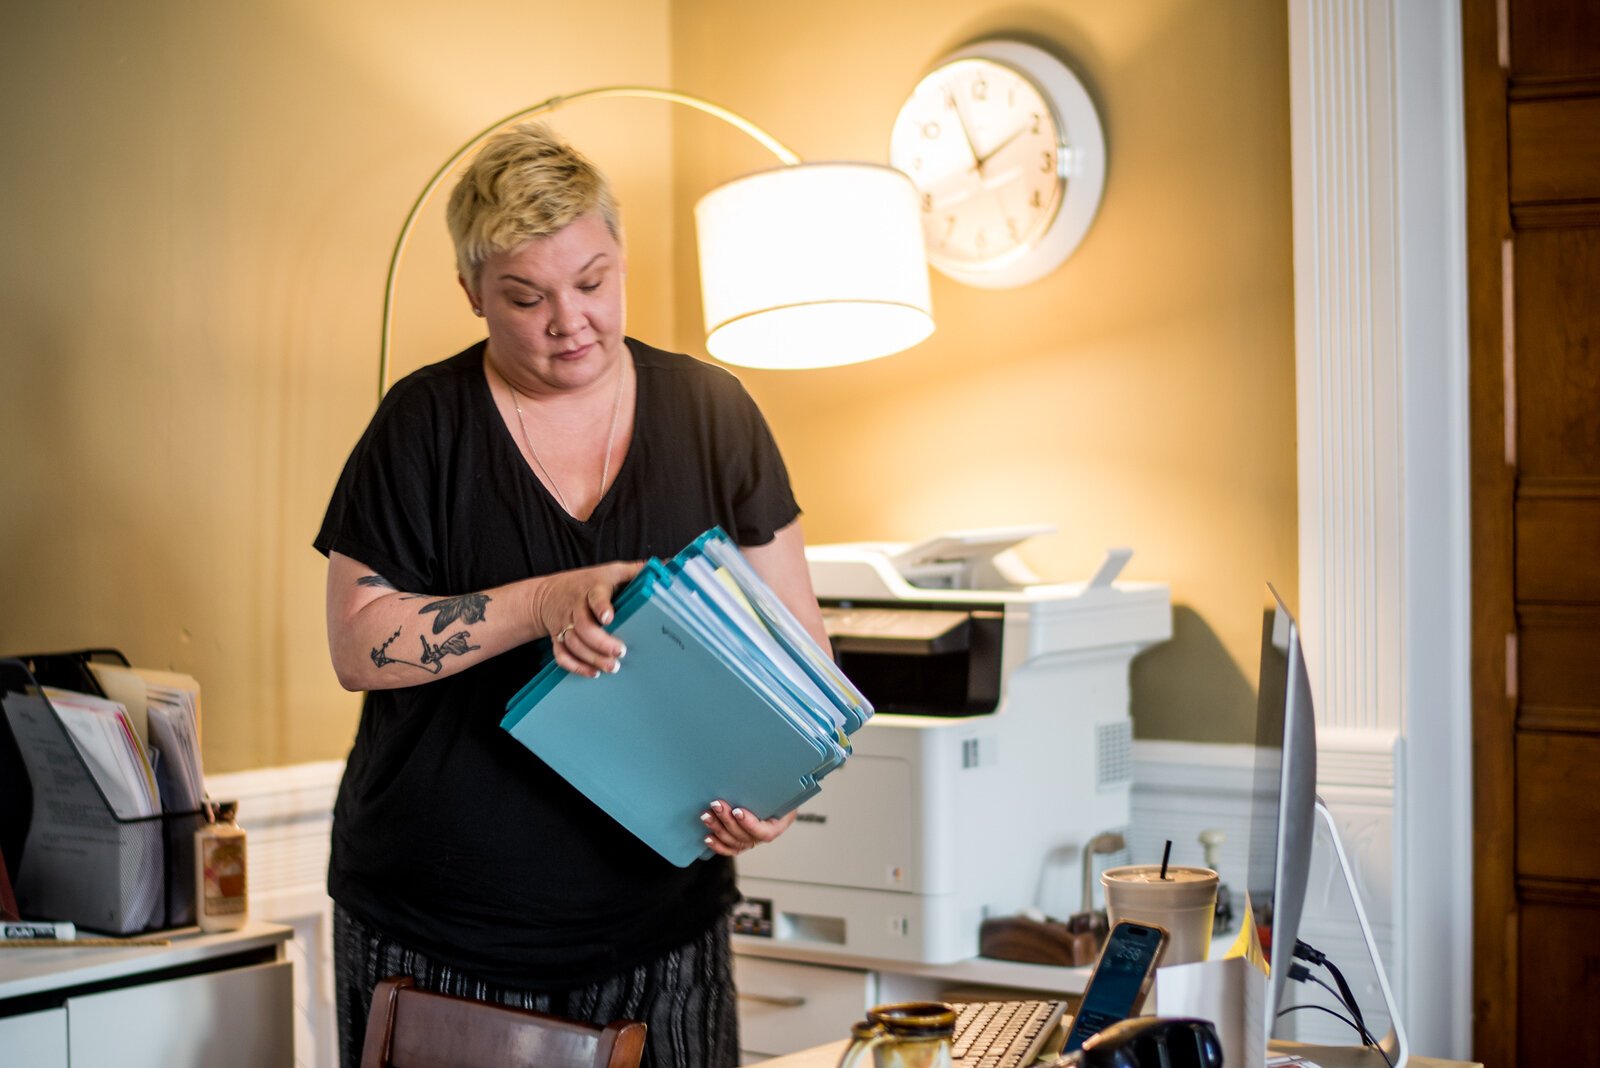 Sarah Cain, executive director, pulls out her active files, thick folders -- 12 cases who are housed, eight who are trying to find housing. She has four new people she'll be meeting soon.